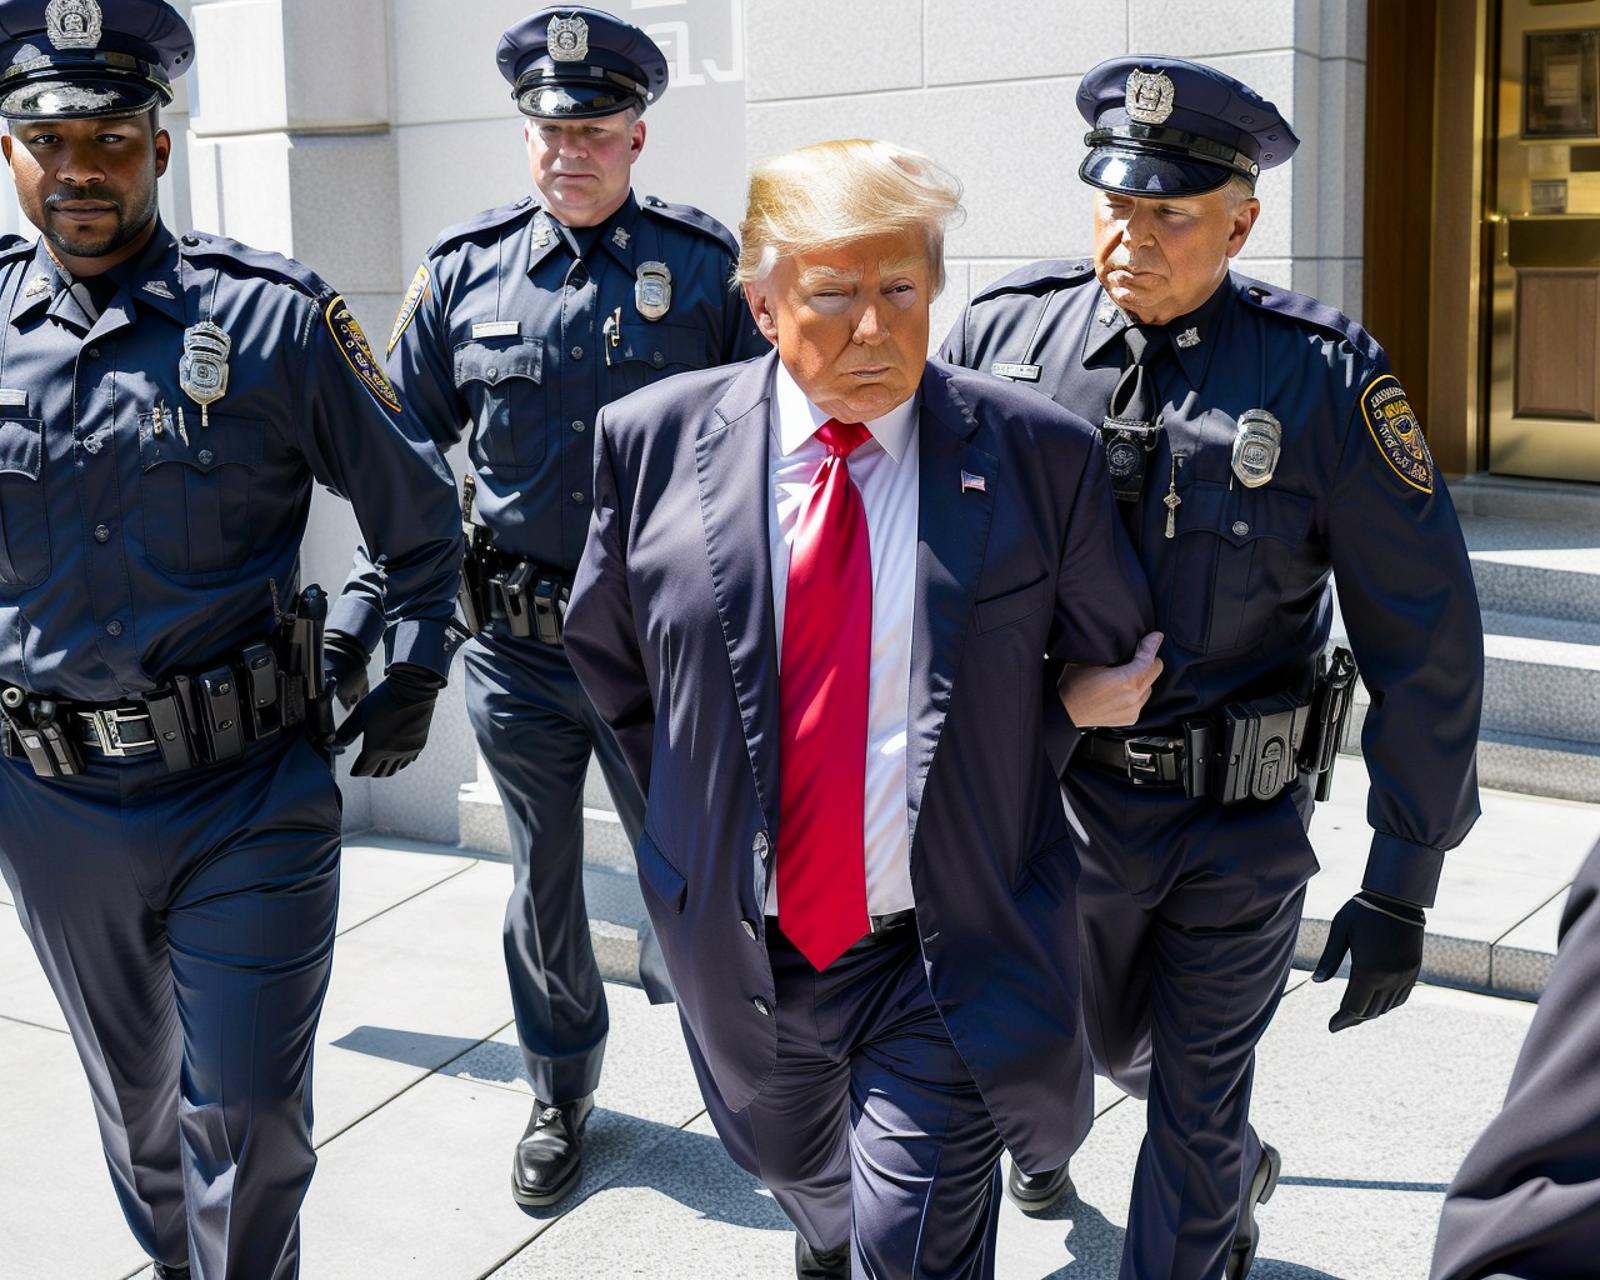 President Trump being led away by police officers